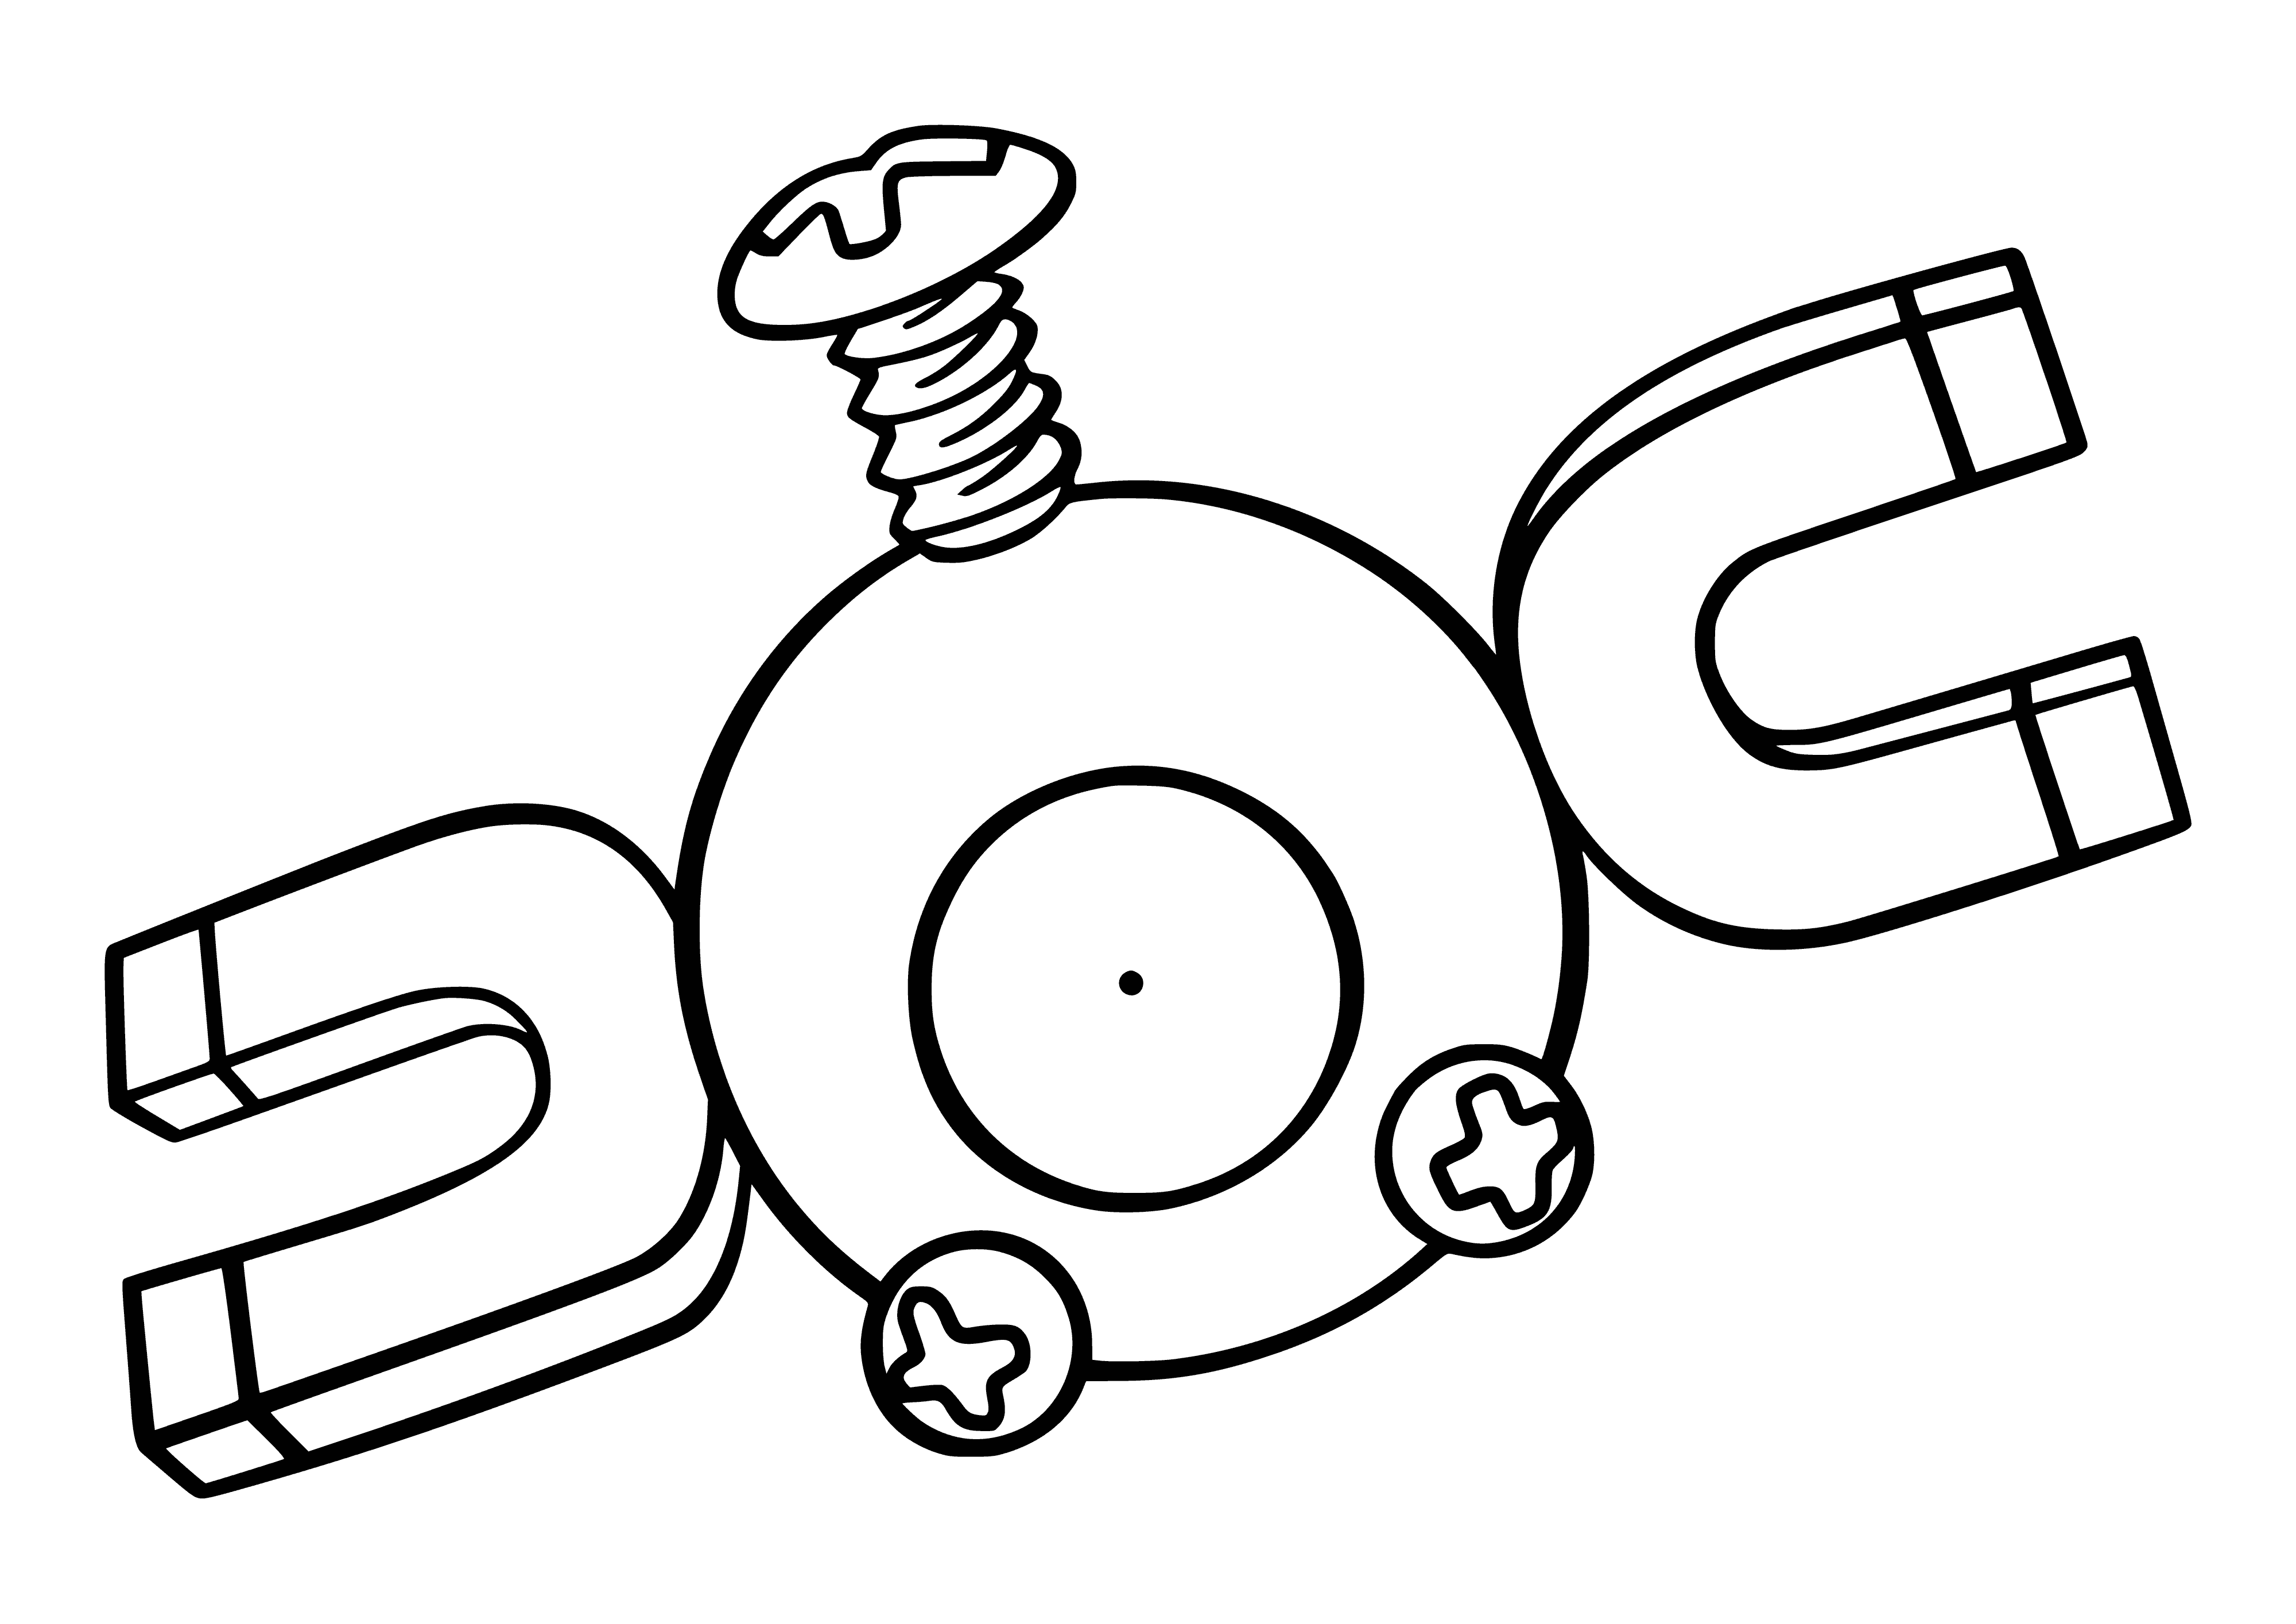 Pokemon Magnemite coloring page